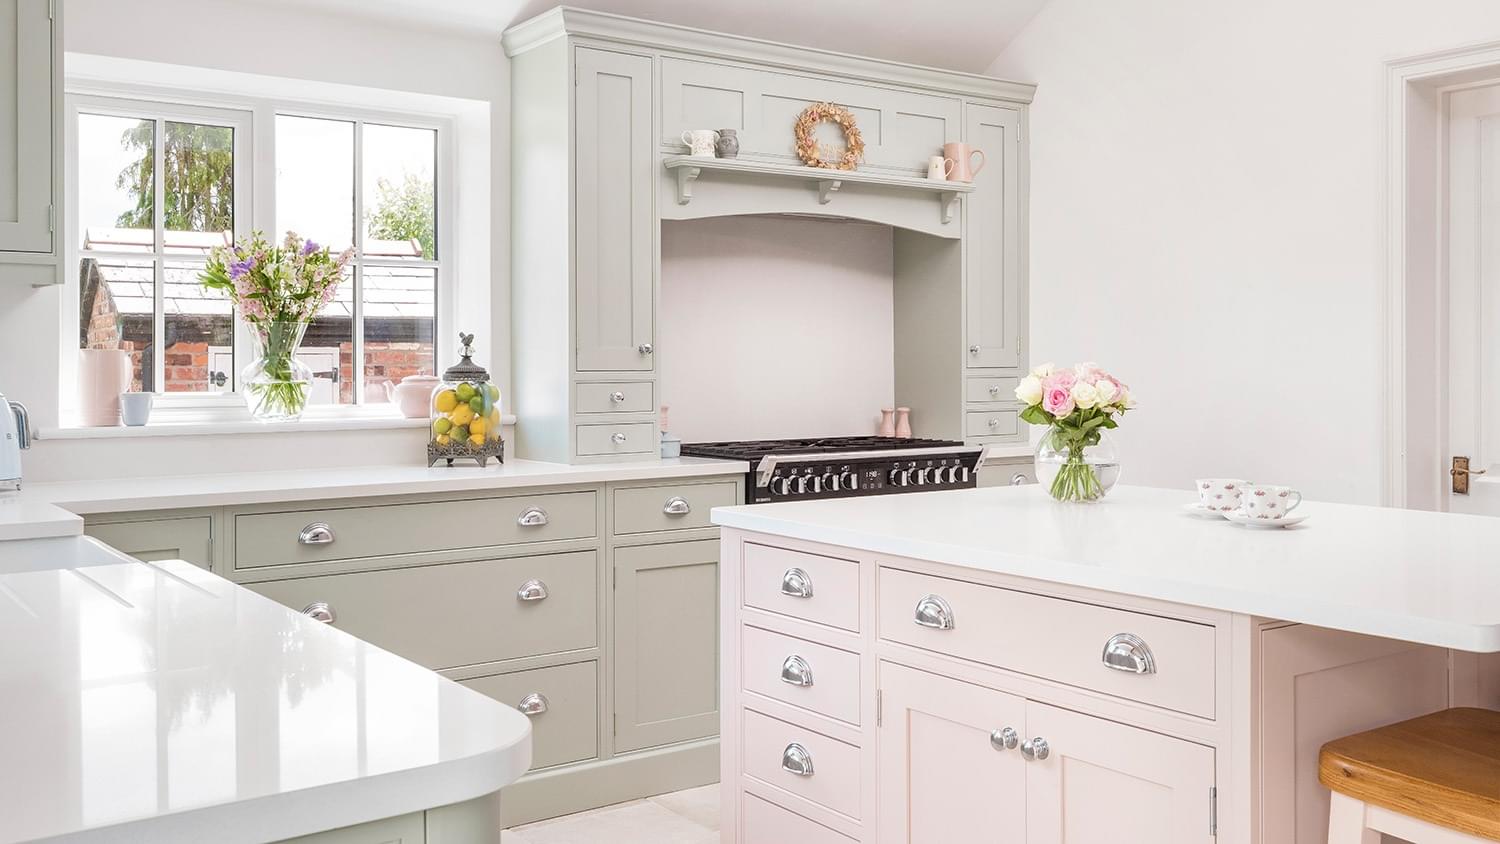 Worktop with contrasting cabinets